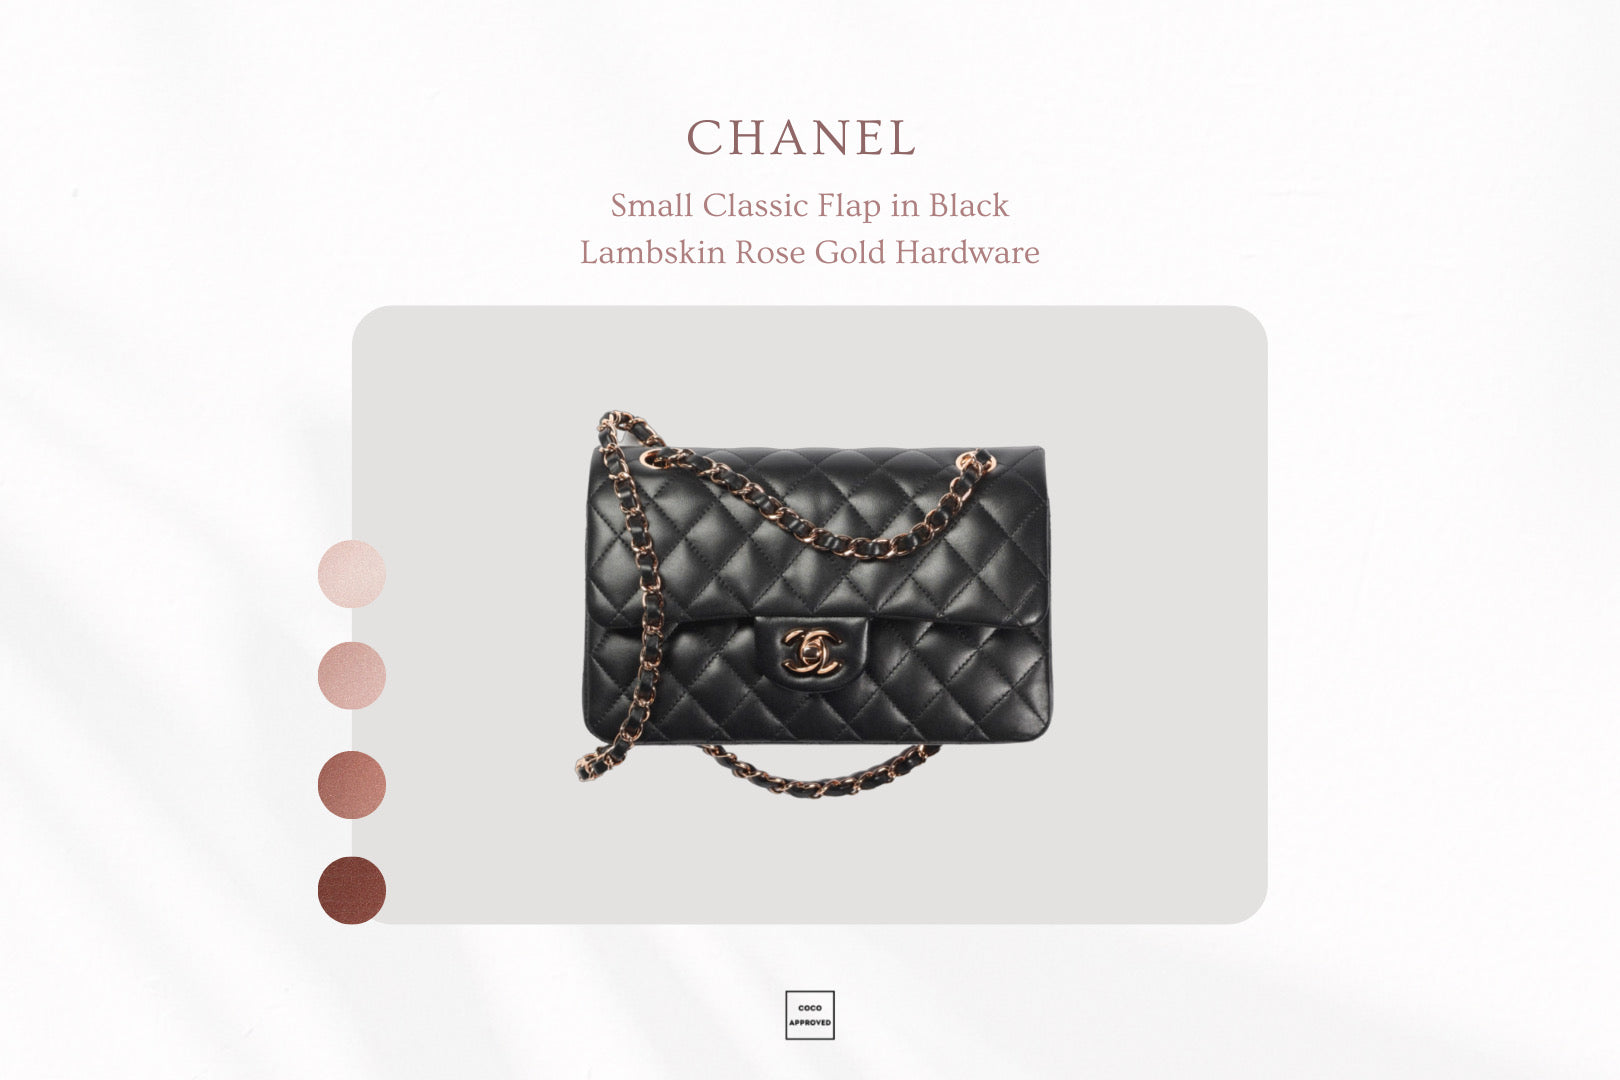 How to Tell if a Chanel Bag is Real or Fake: Authenticating a